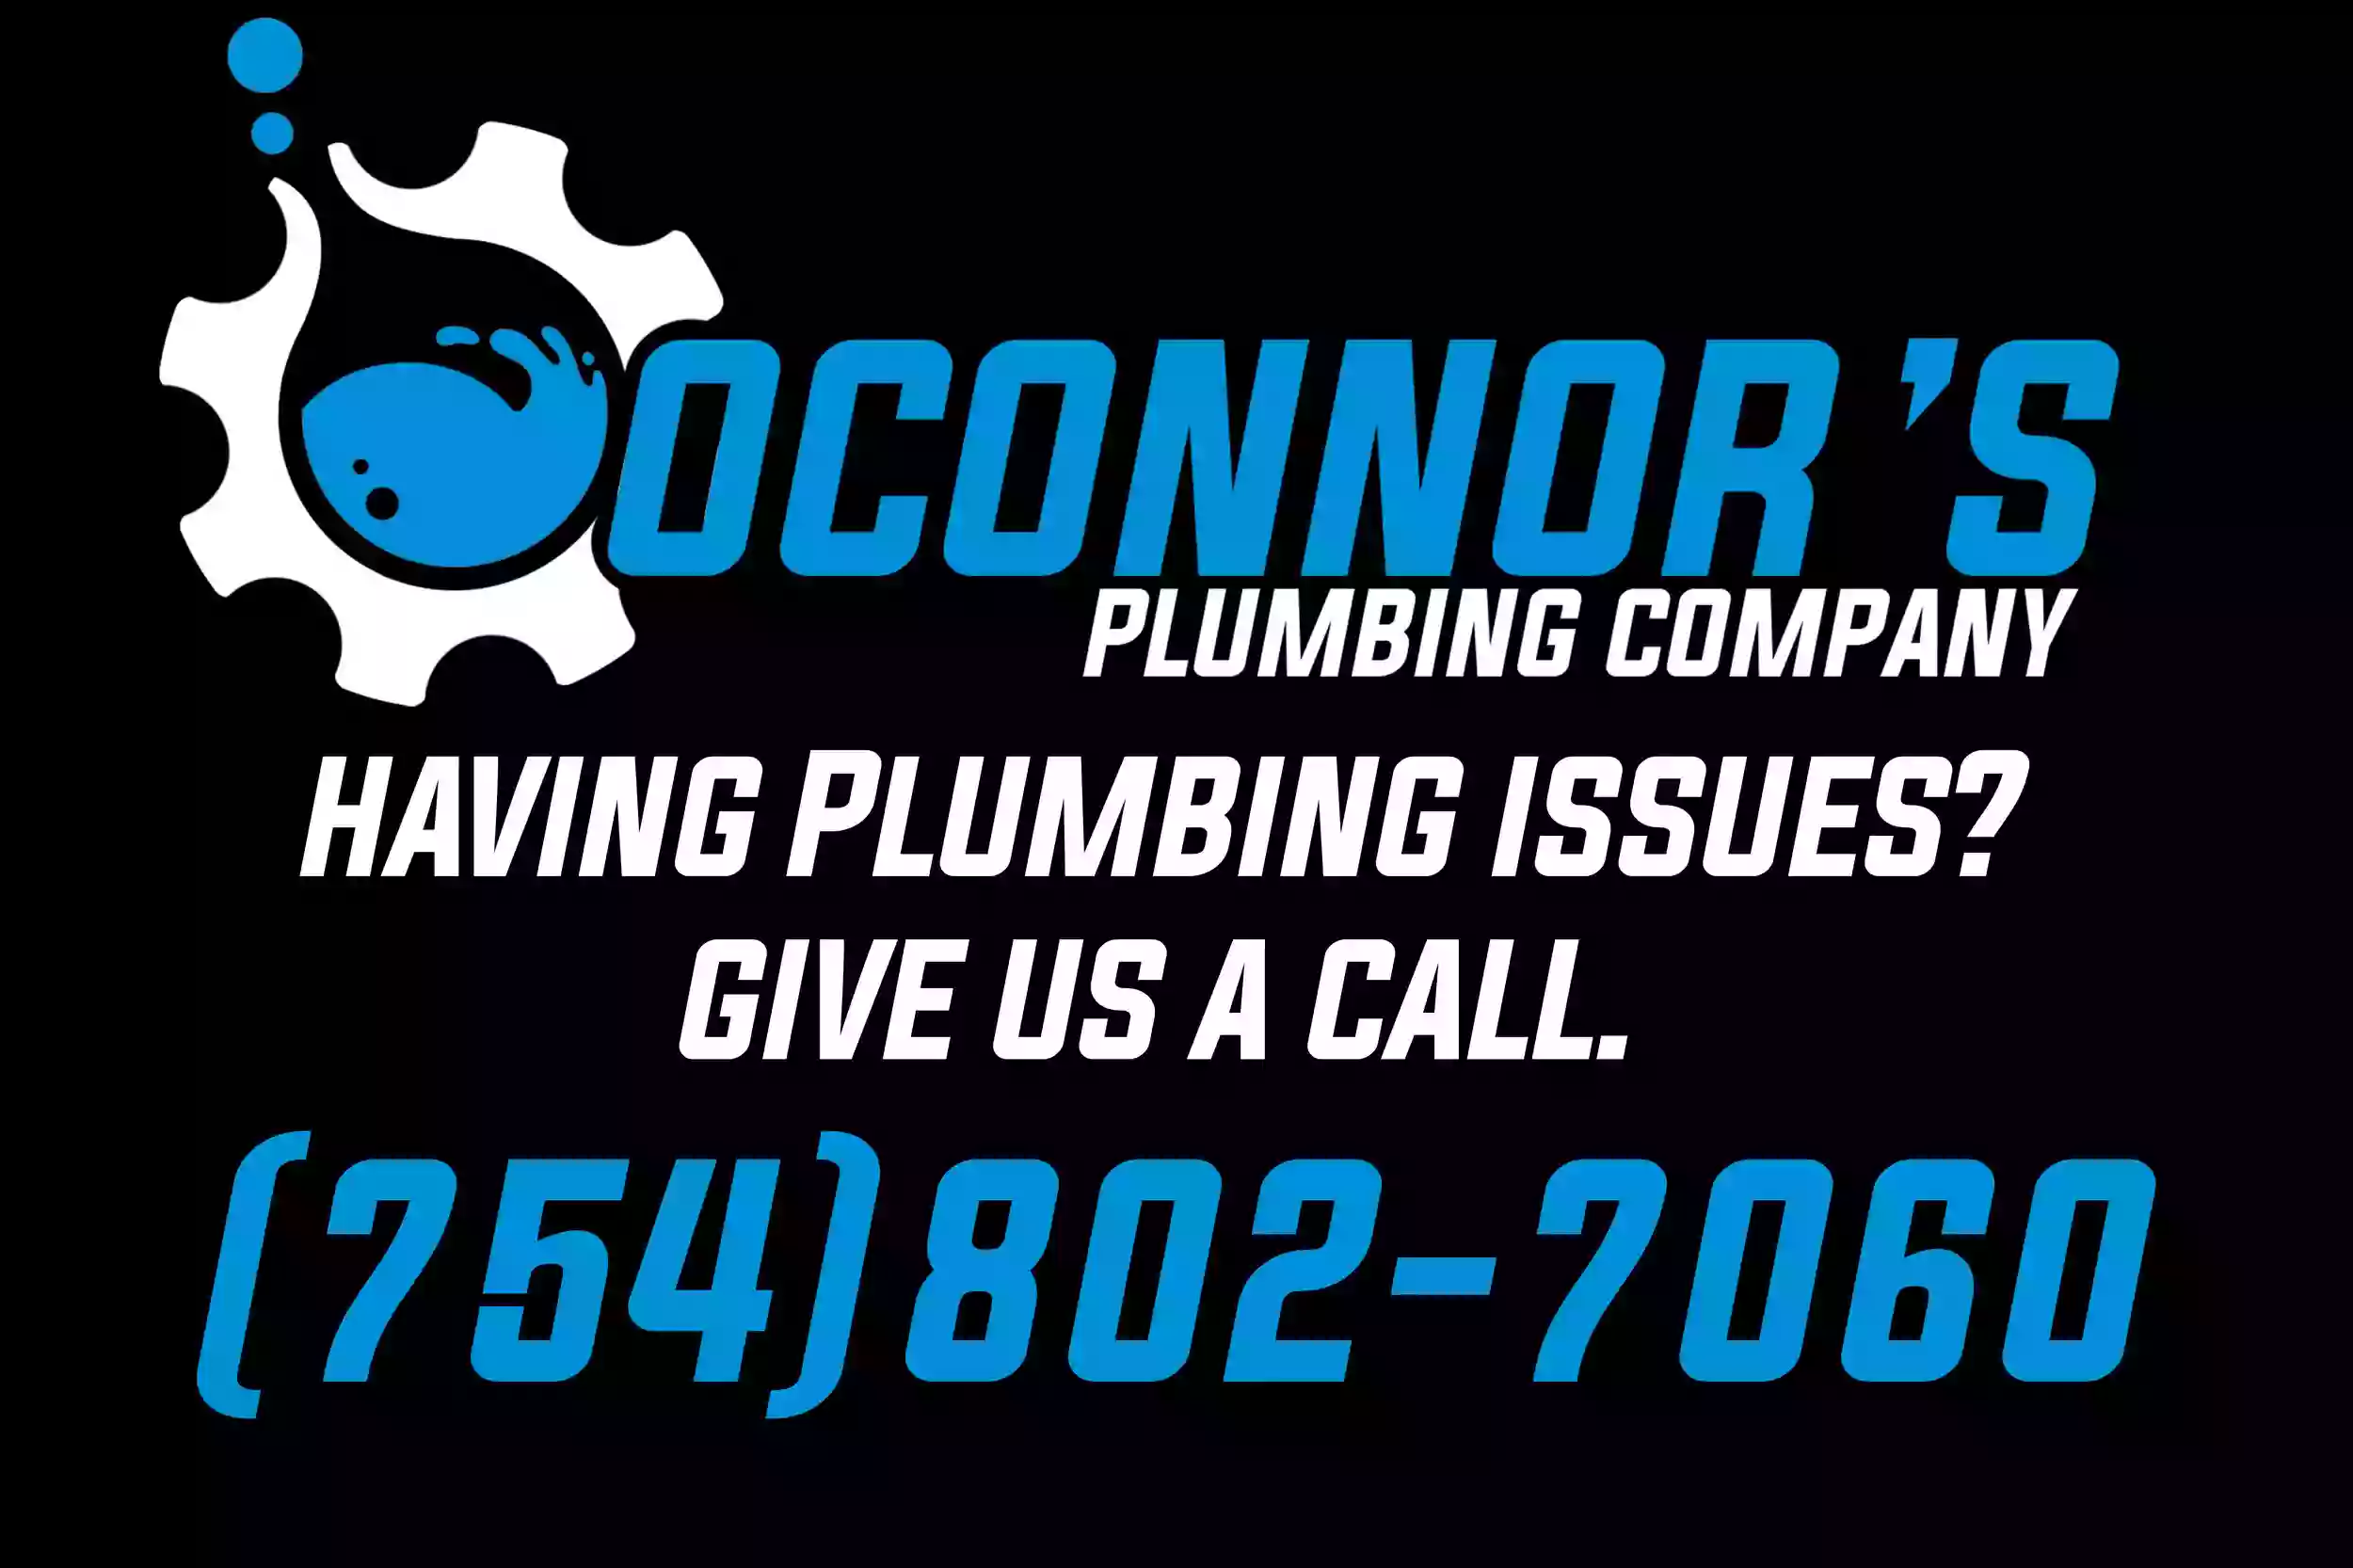 O'Connor's Plumbing and Septic Services